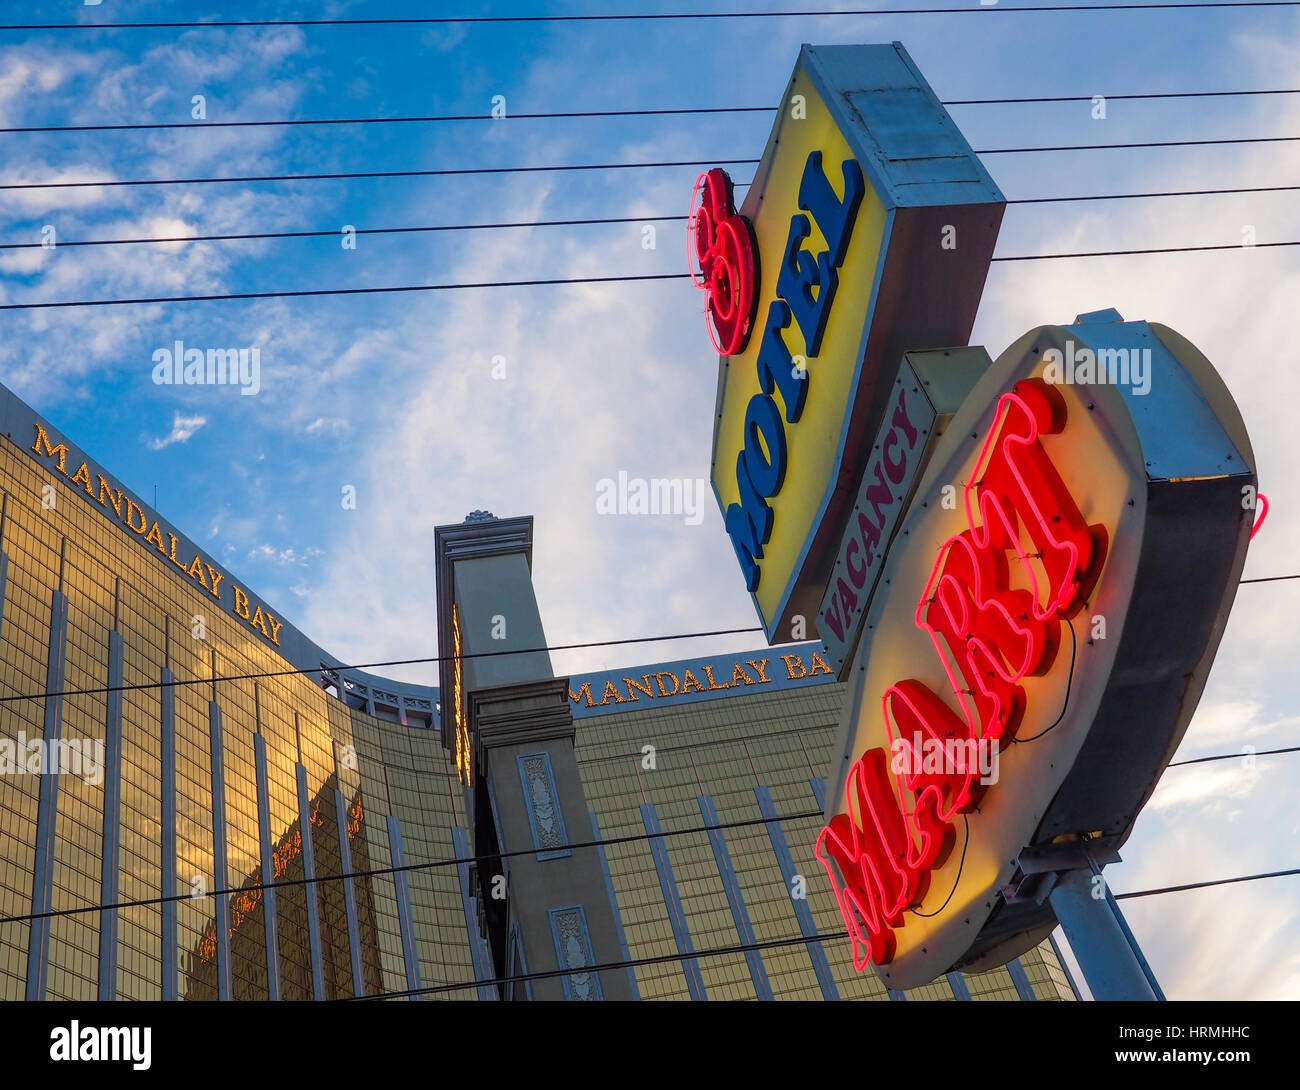 The illuminated neon sign of a budget motel in front of the facade of the Mandalay Bay luxury hotel and casino on the Las Vegas Strip. Stock Photo